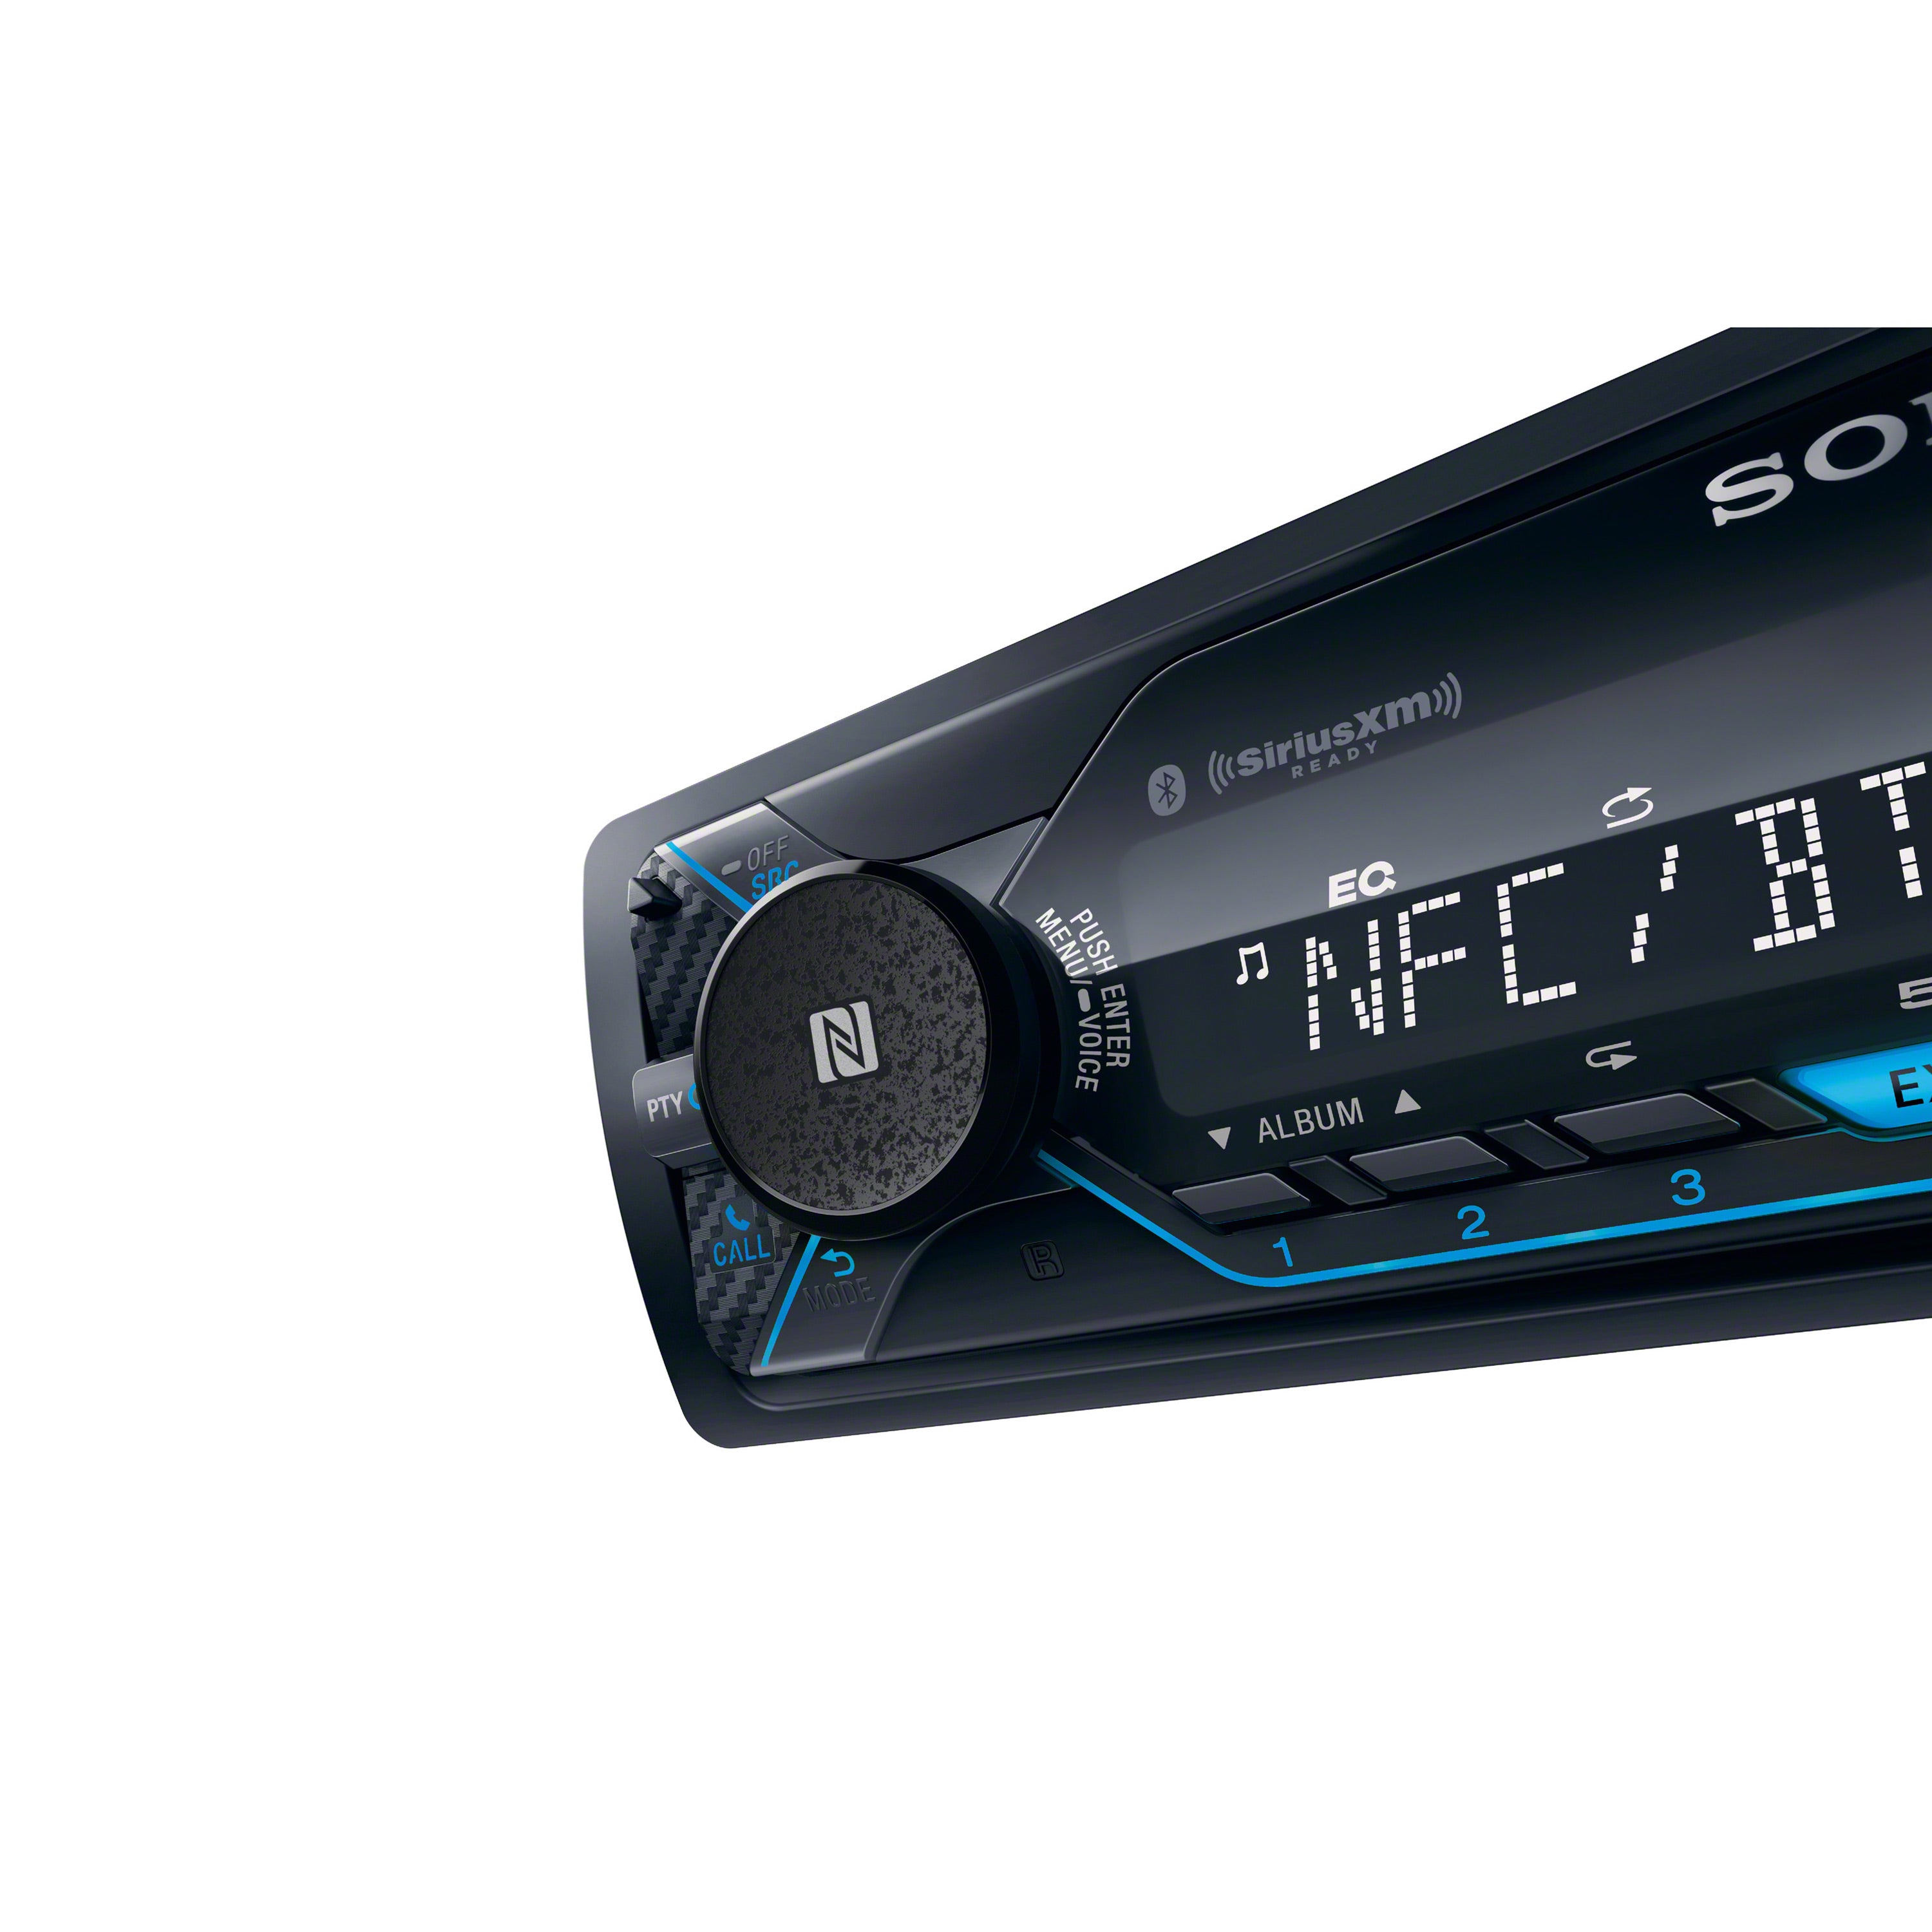 DSX-A415BT | Media Receiver with Bluetooth® Technology